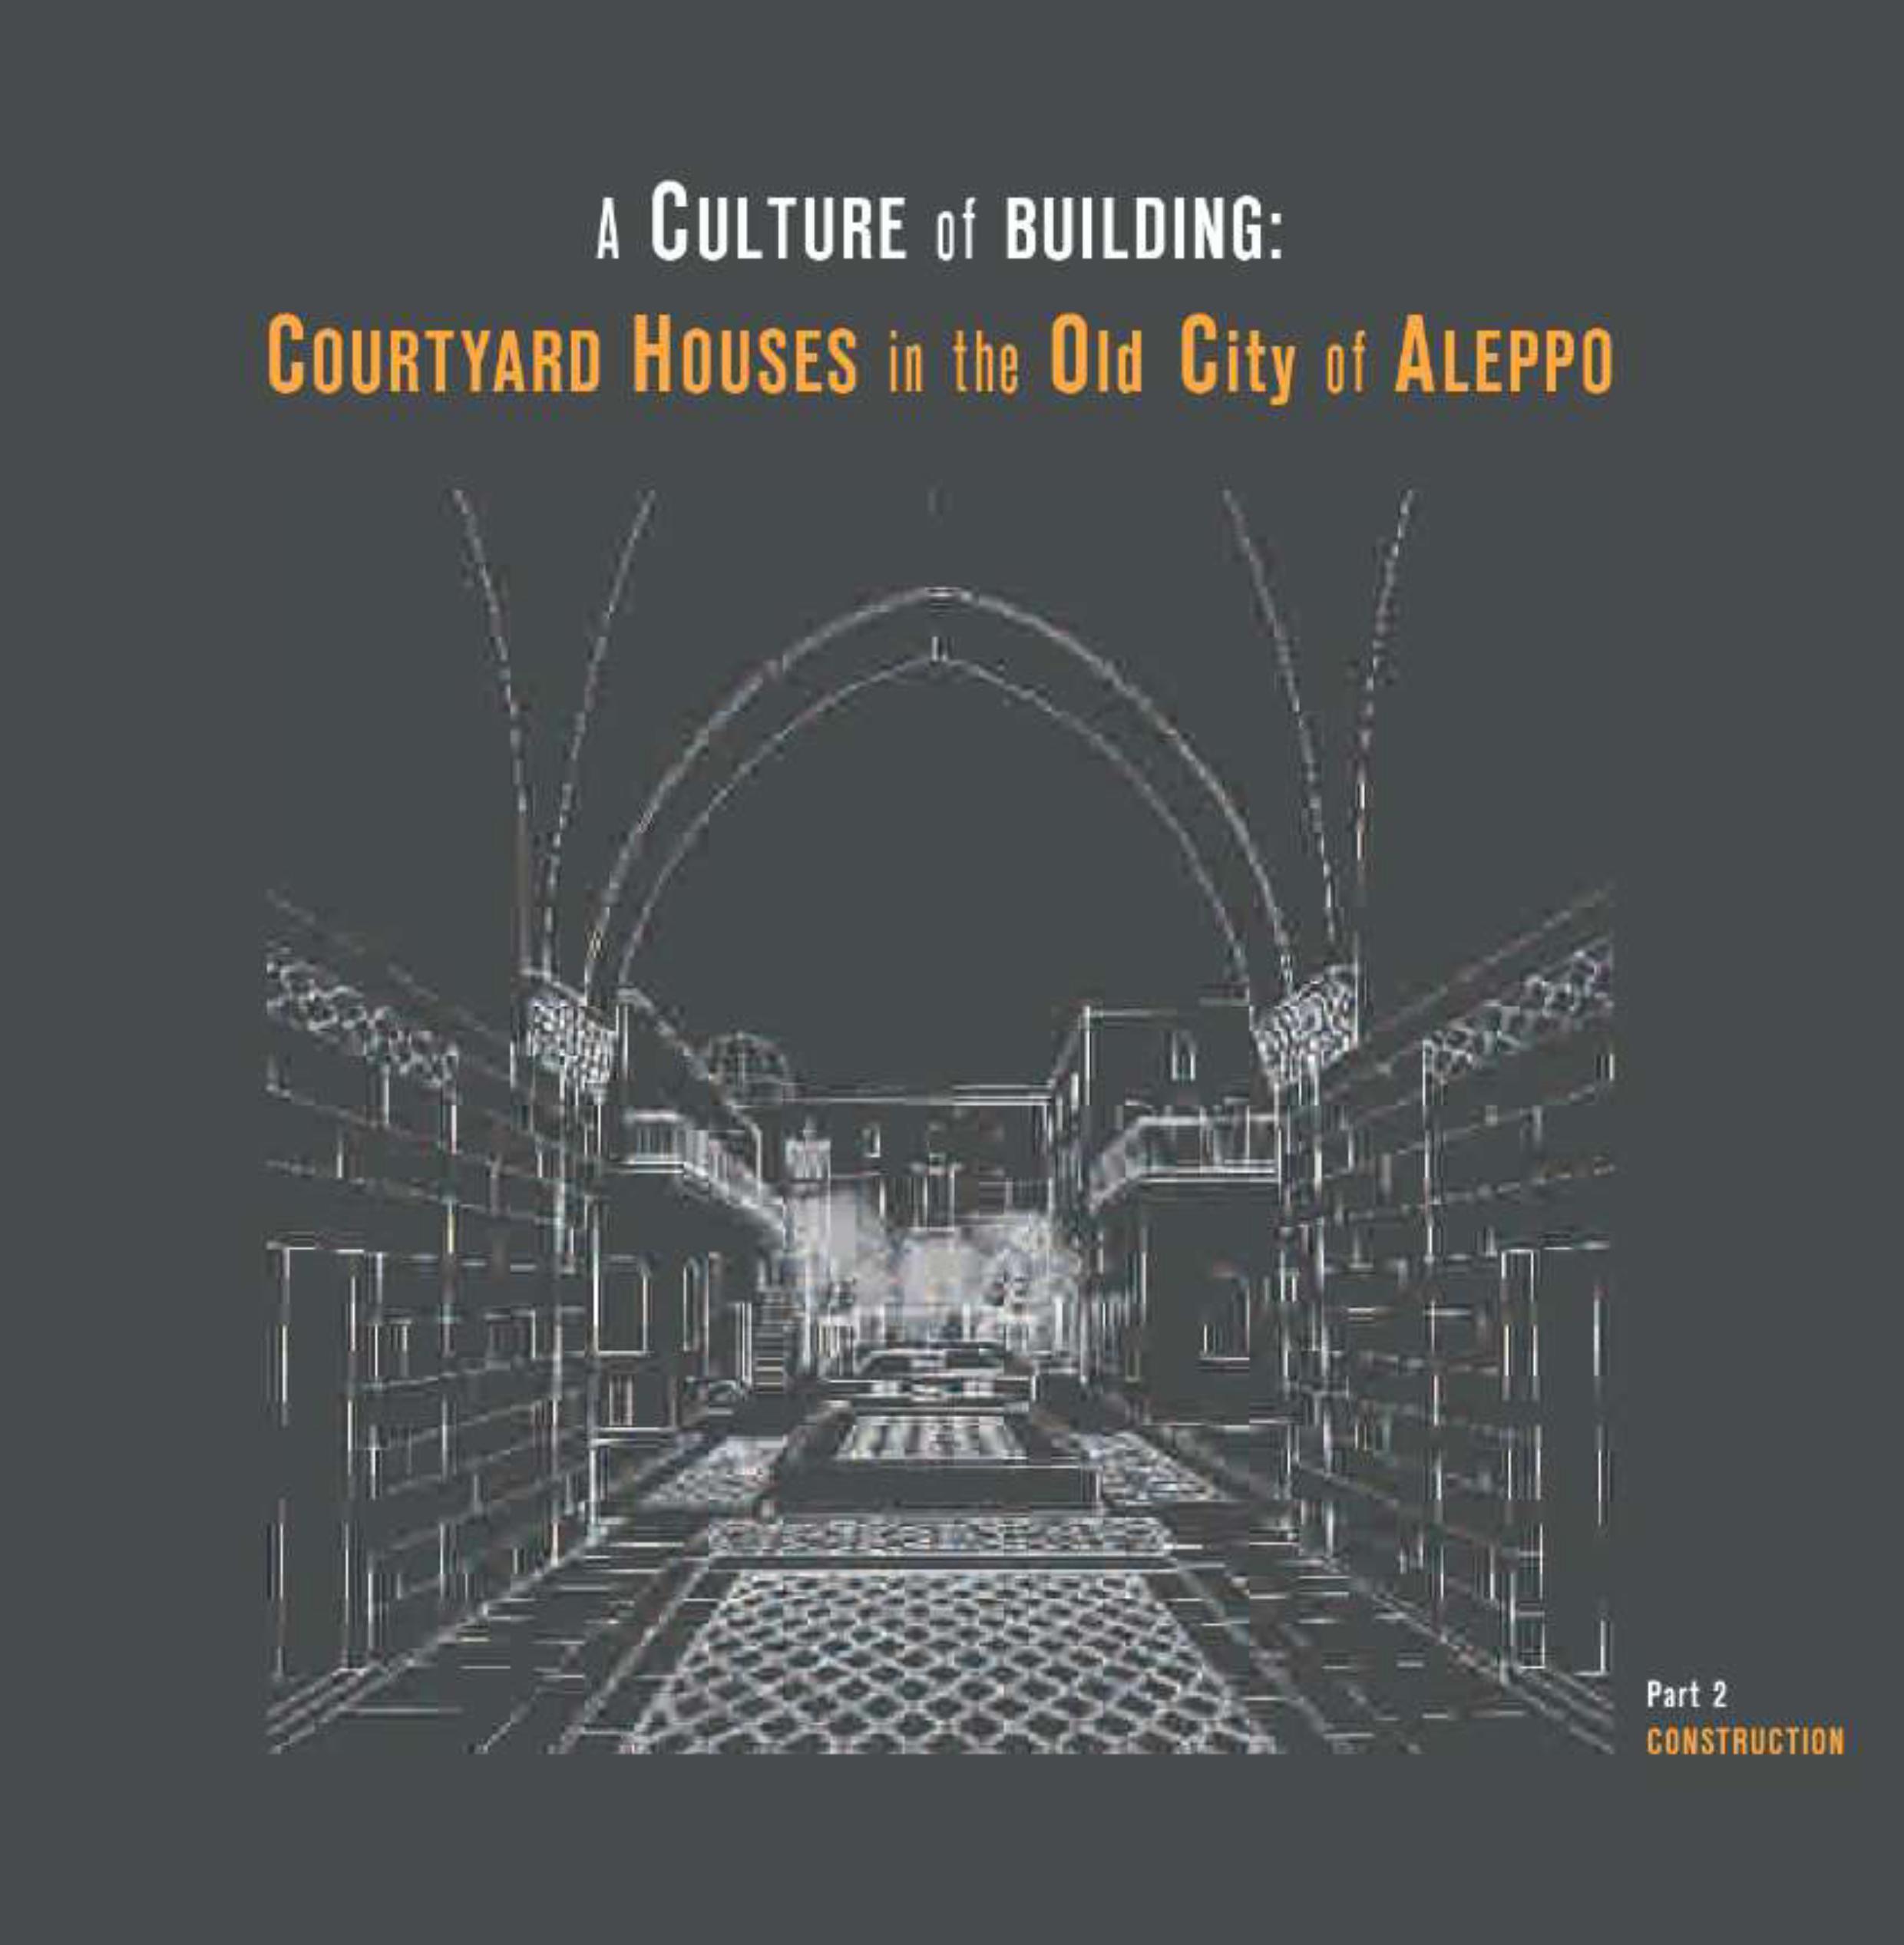 Dayoub, Dima – Ruba Kasmo – Anne Mollenhauer : A Culture of Building: Courtyard Houses in the Old City of Aleppo. Construction (Part 2).